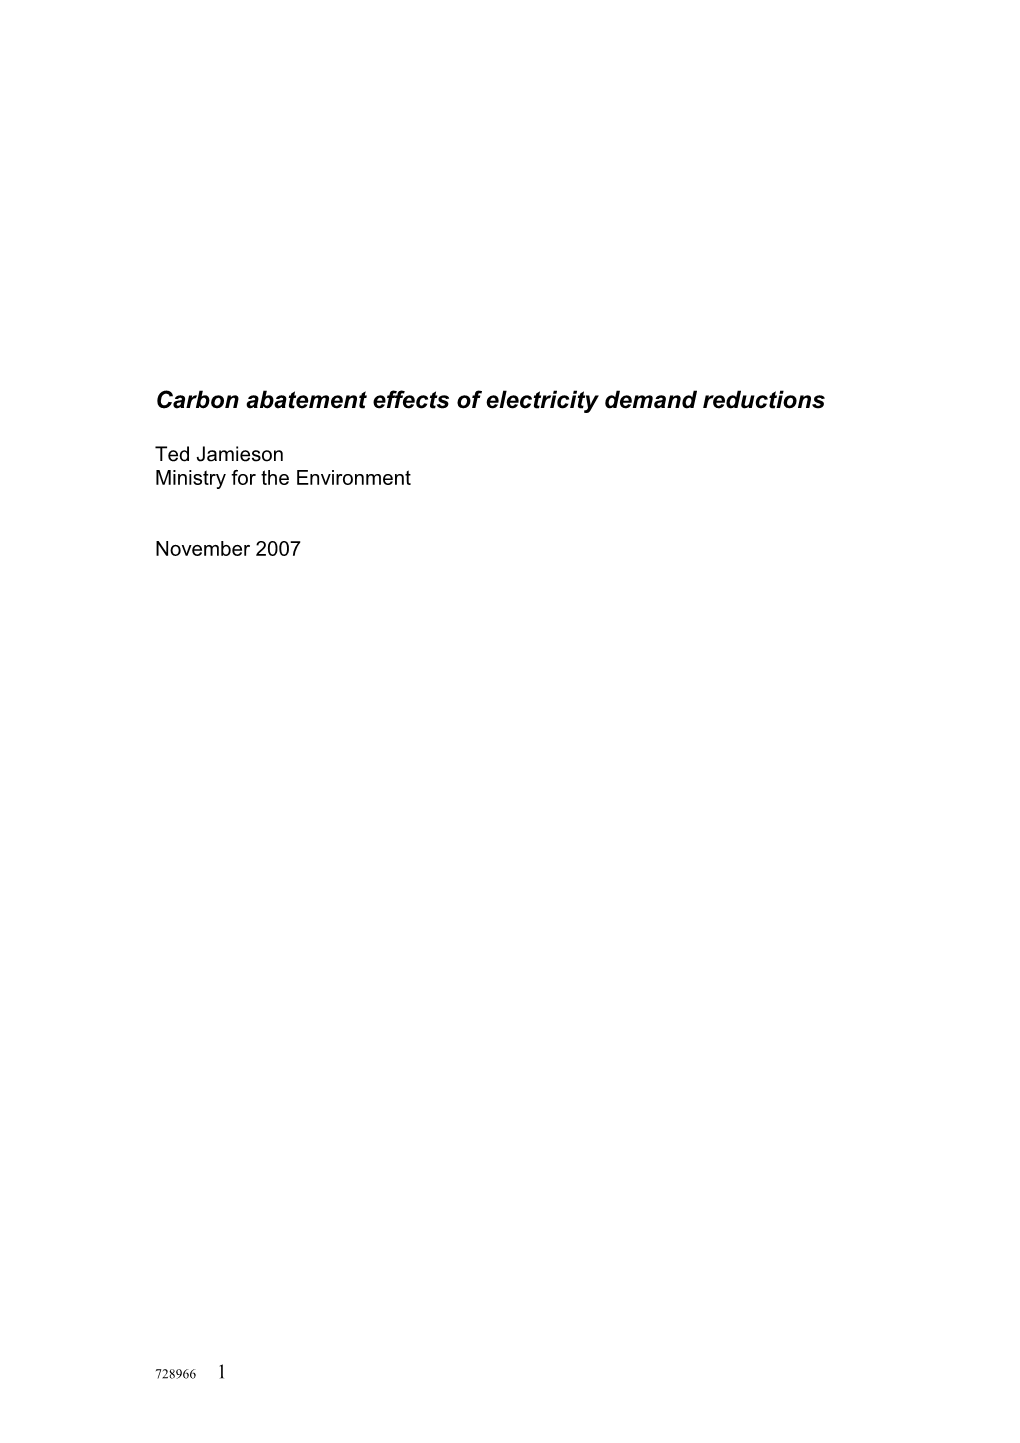 Carbon-Abatement-Effects-Of-Electricity-Demand-Reductions-Final